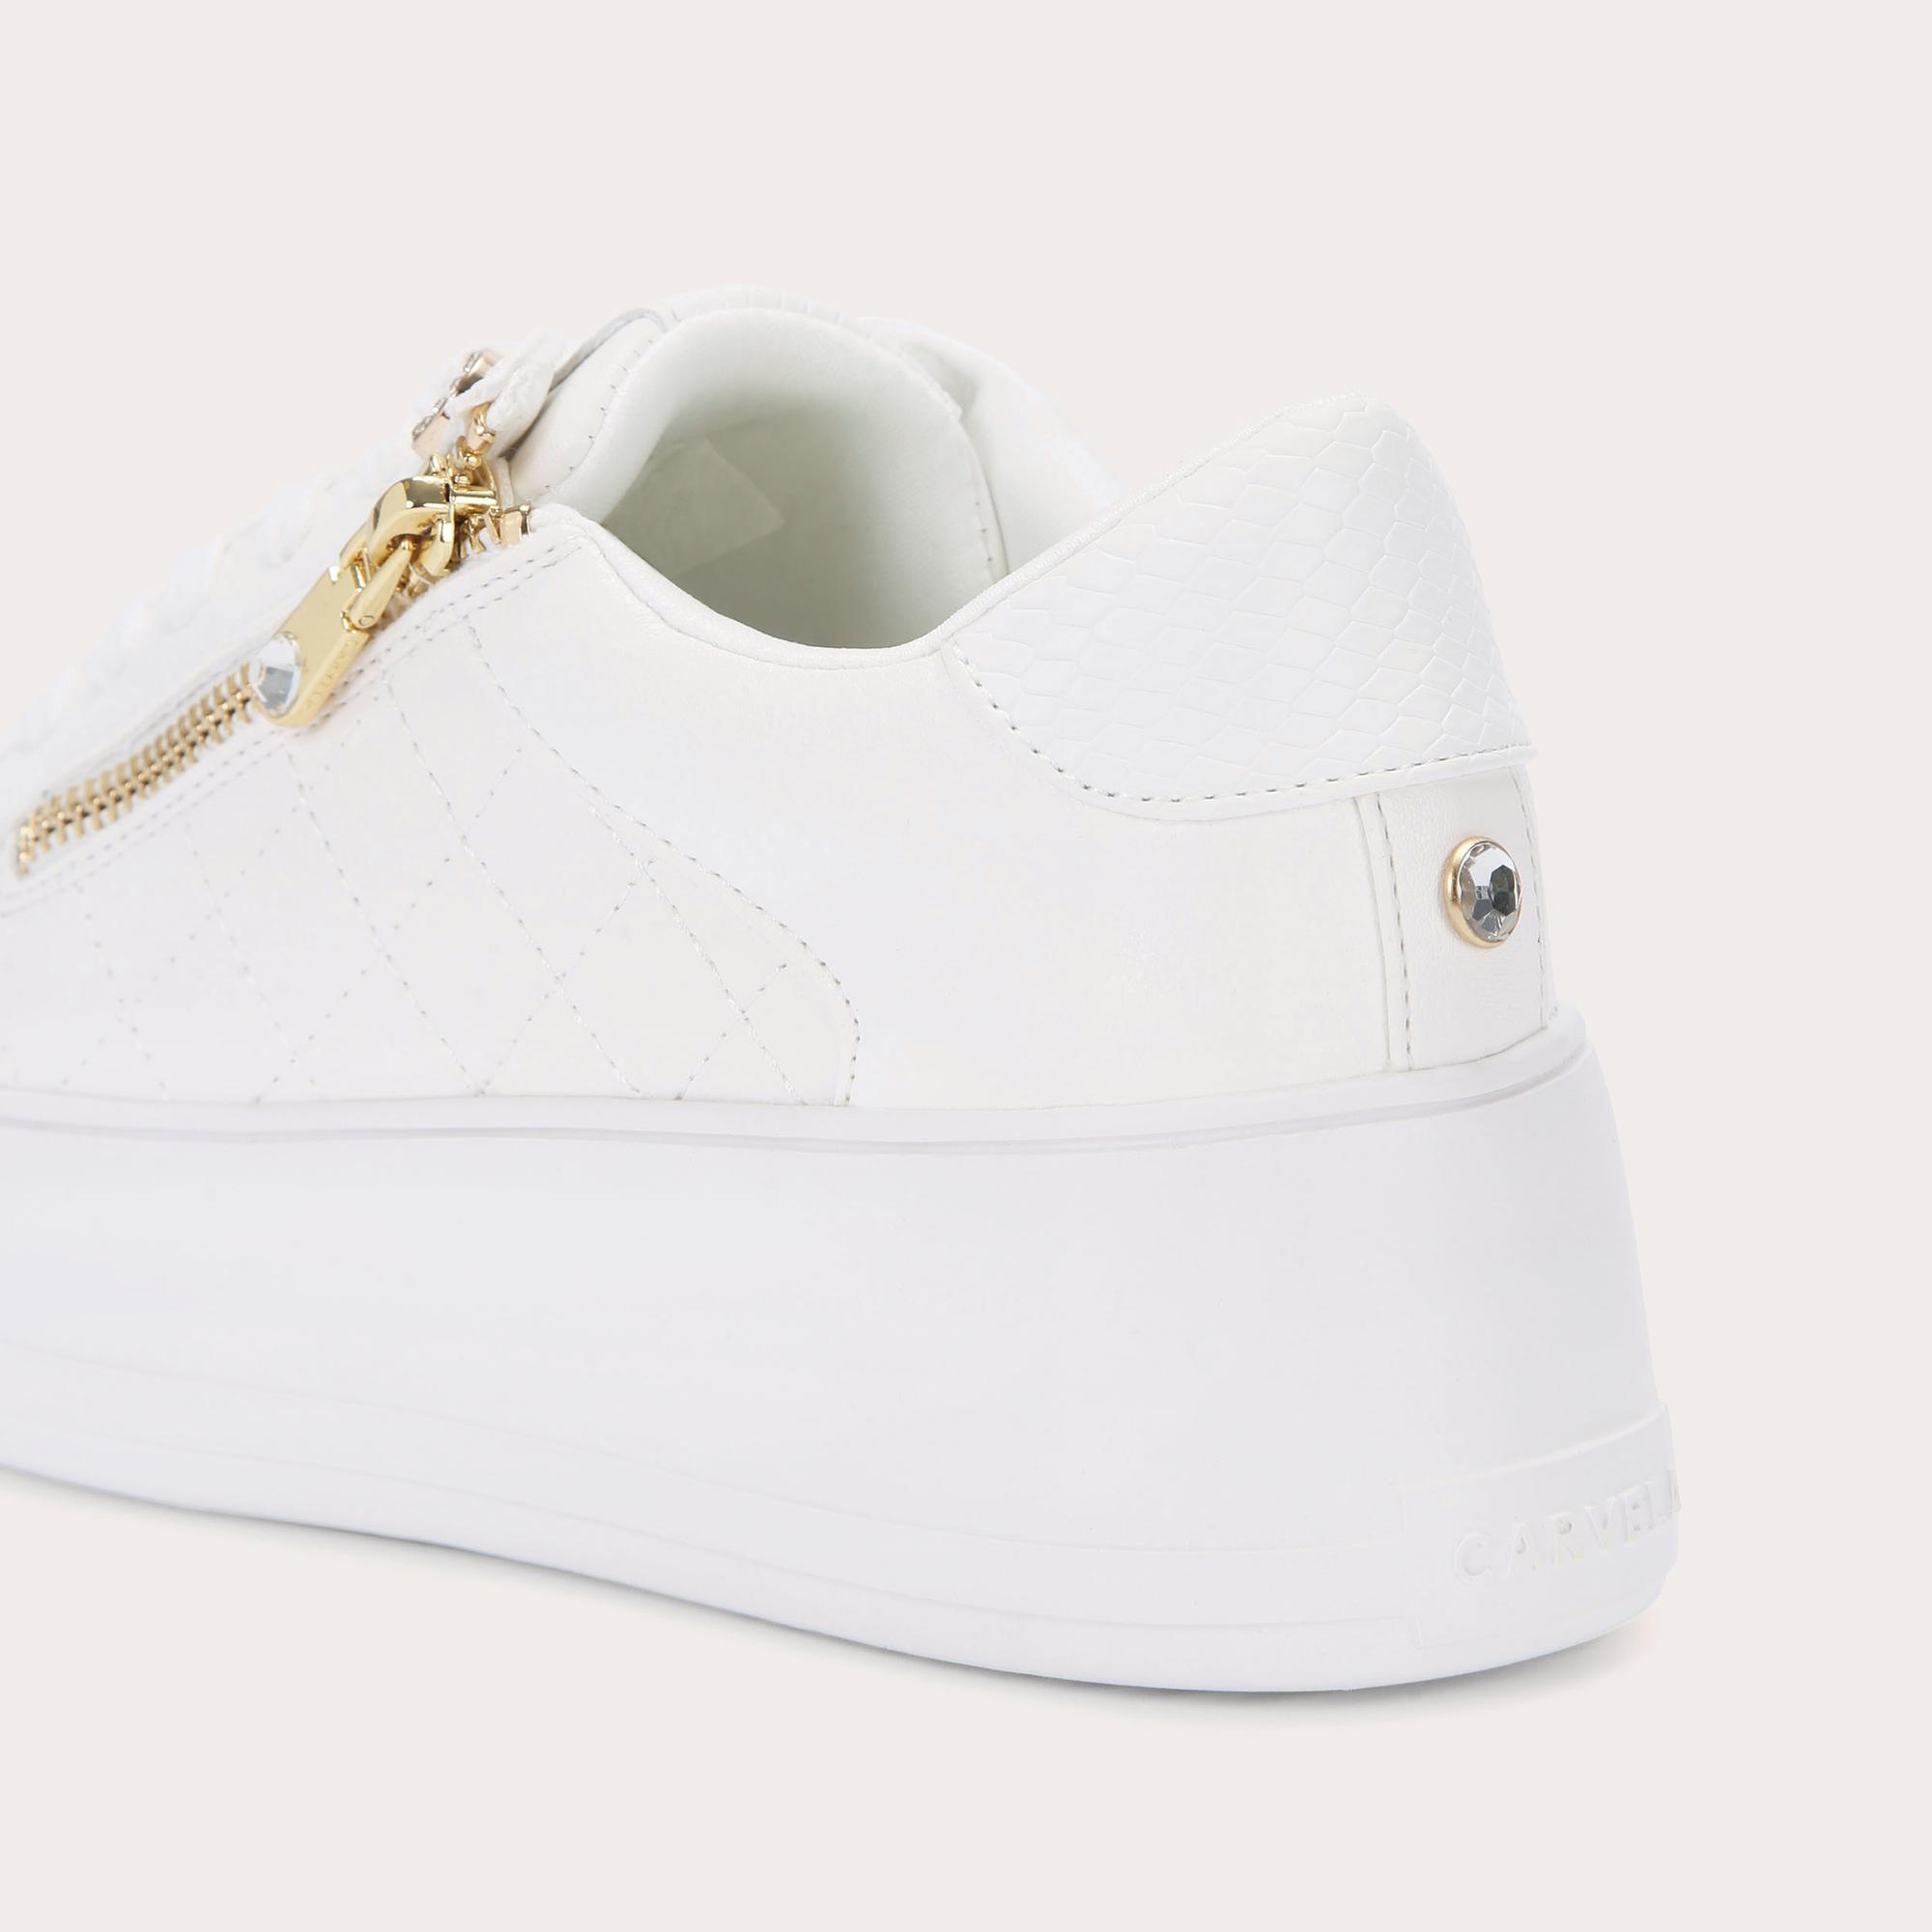 JIVE ZIP White Lace Up Trainer by CARVELA